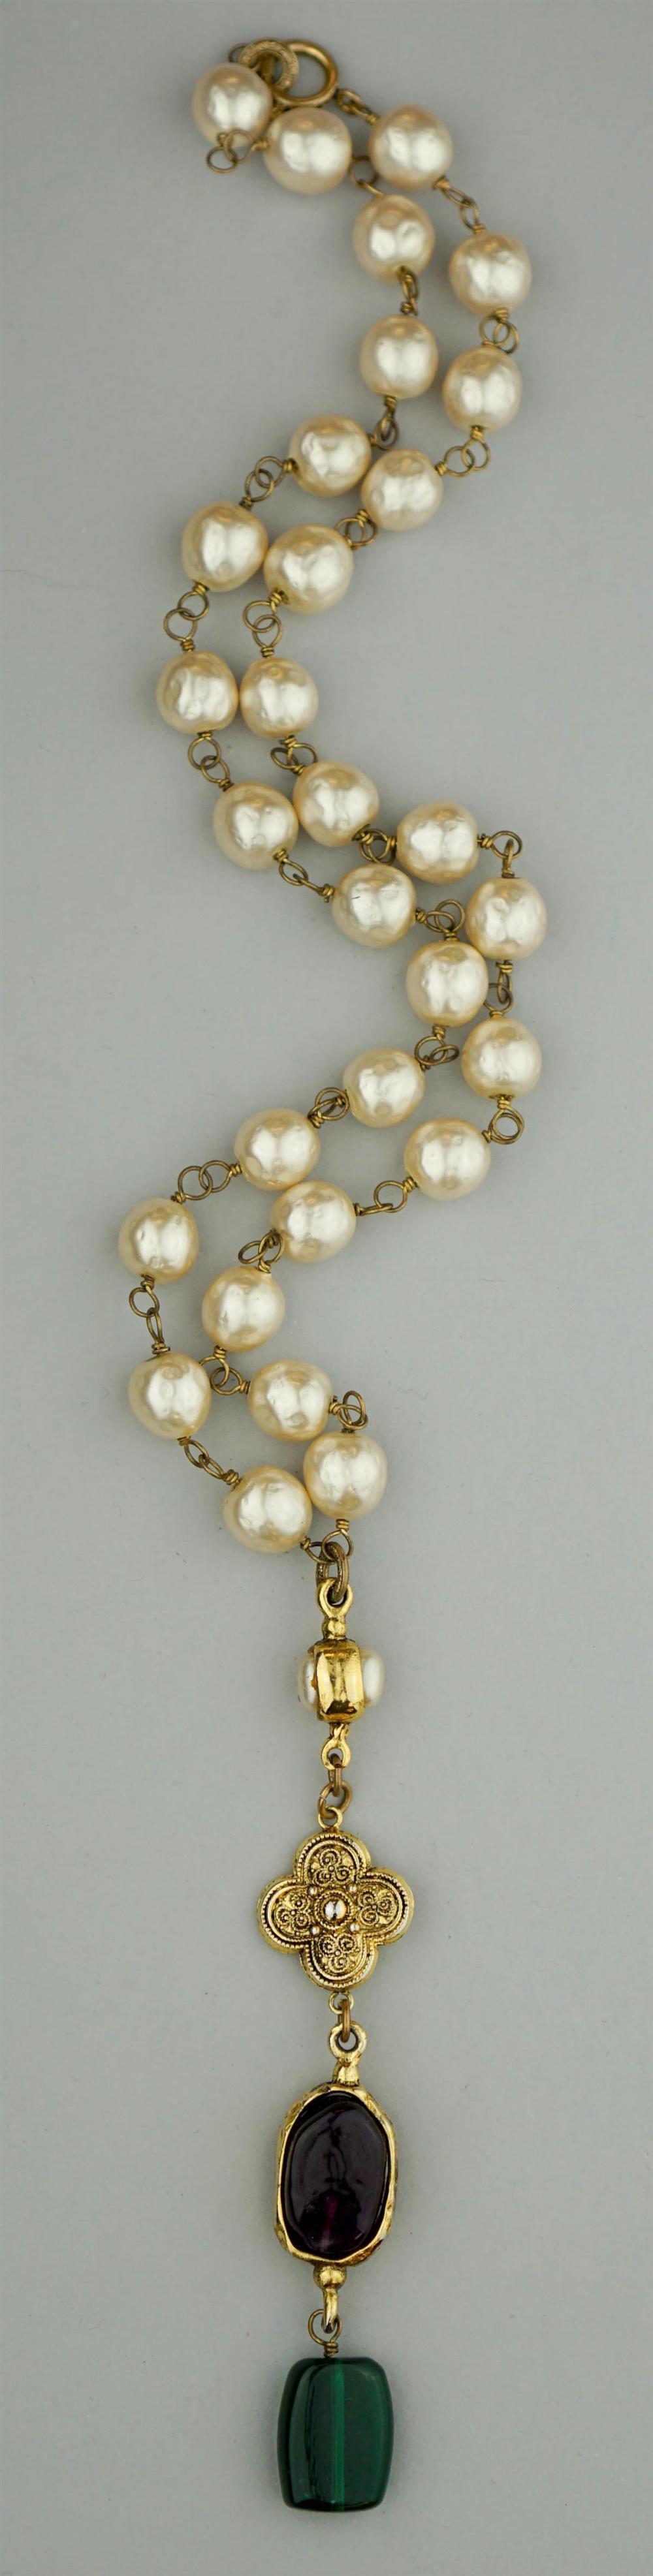 VINTAGE CHANEL FAUX PEARL AND GEMSTONE 339b0e